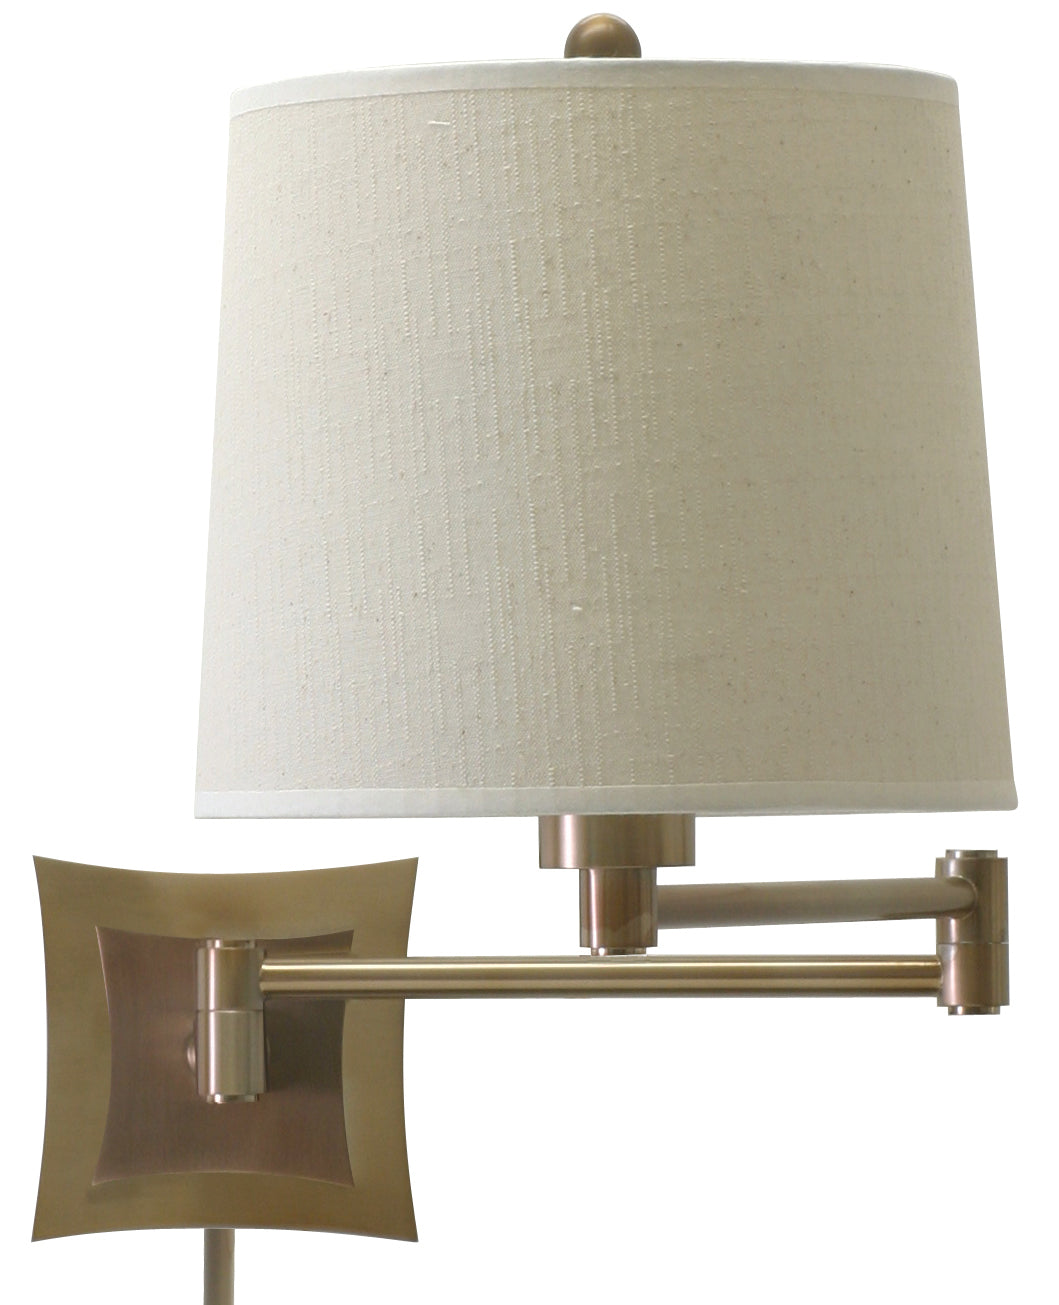 House of Troy Wall Swing Arm Lamp in Antique Brass WS752-AB